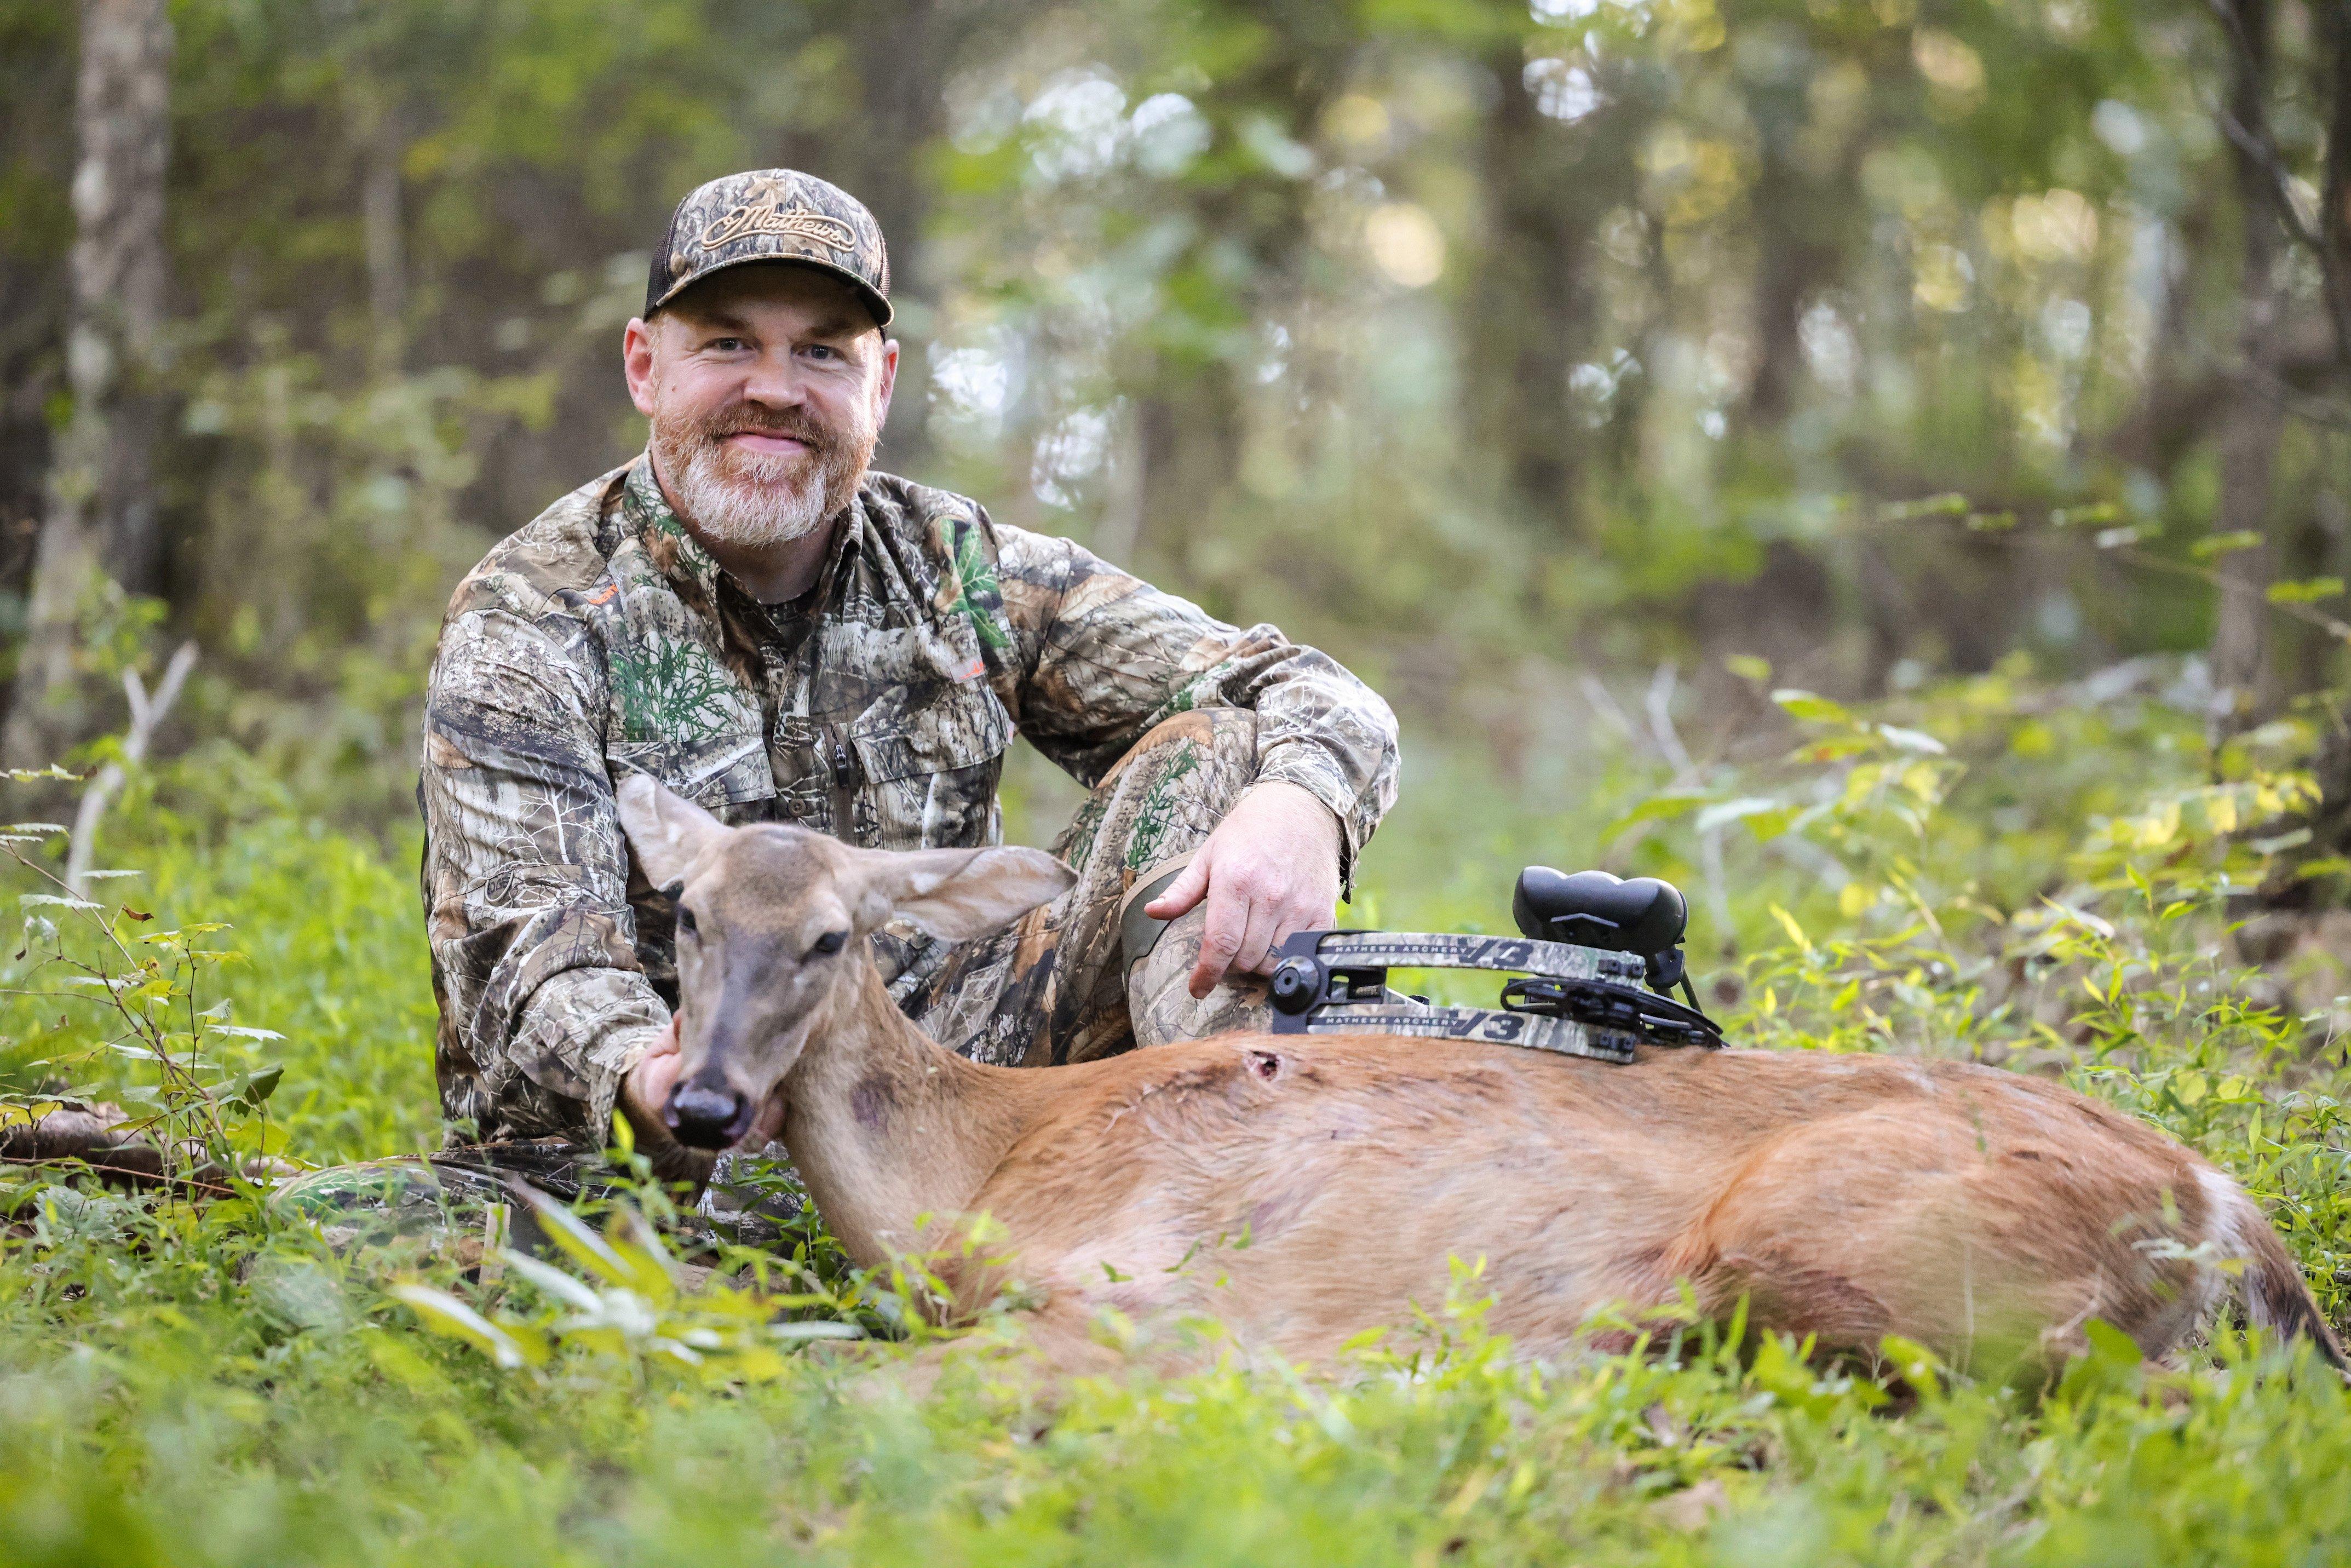 Antler obsession got ugly some years ago. Fortunately, today's deer hunters seem to remember what matters most. Realtree Media Image